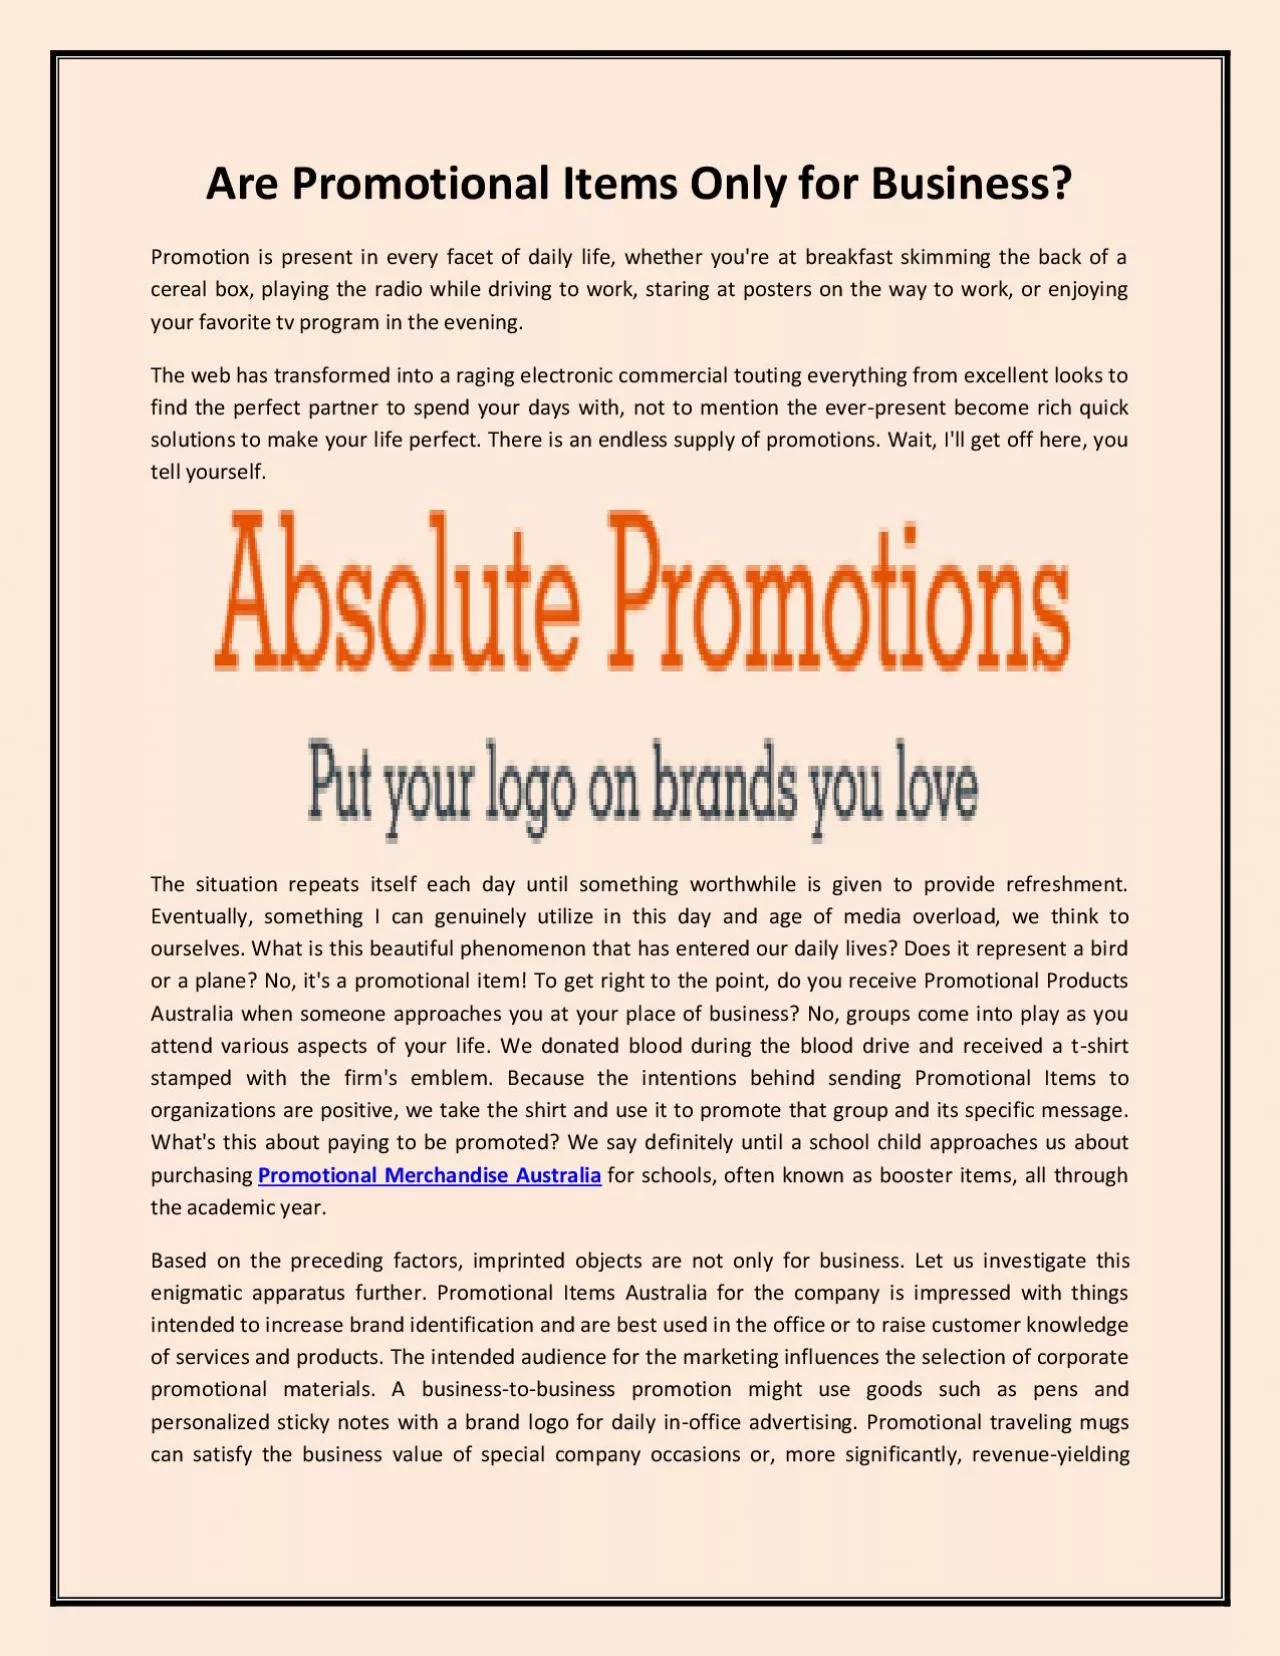 Are Promotional Items Only for Business?